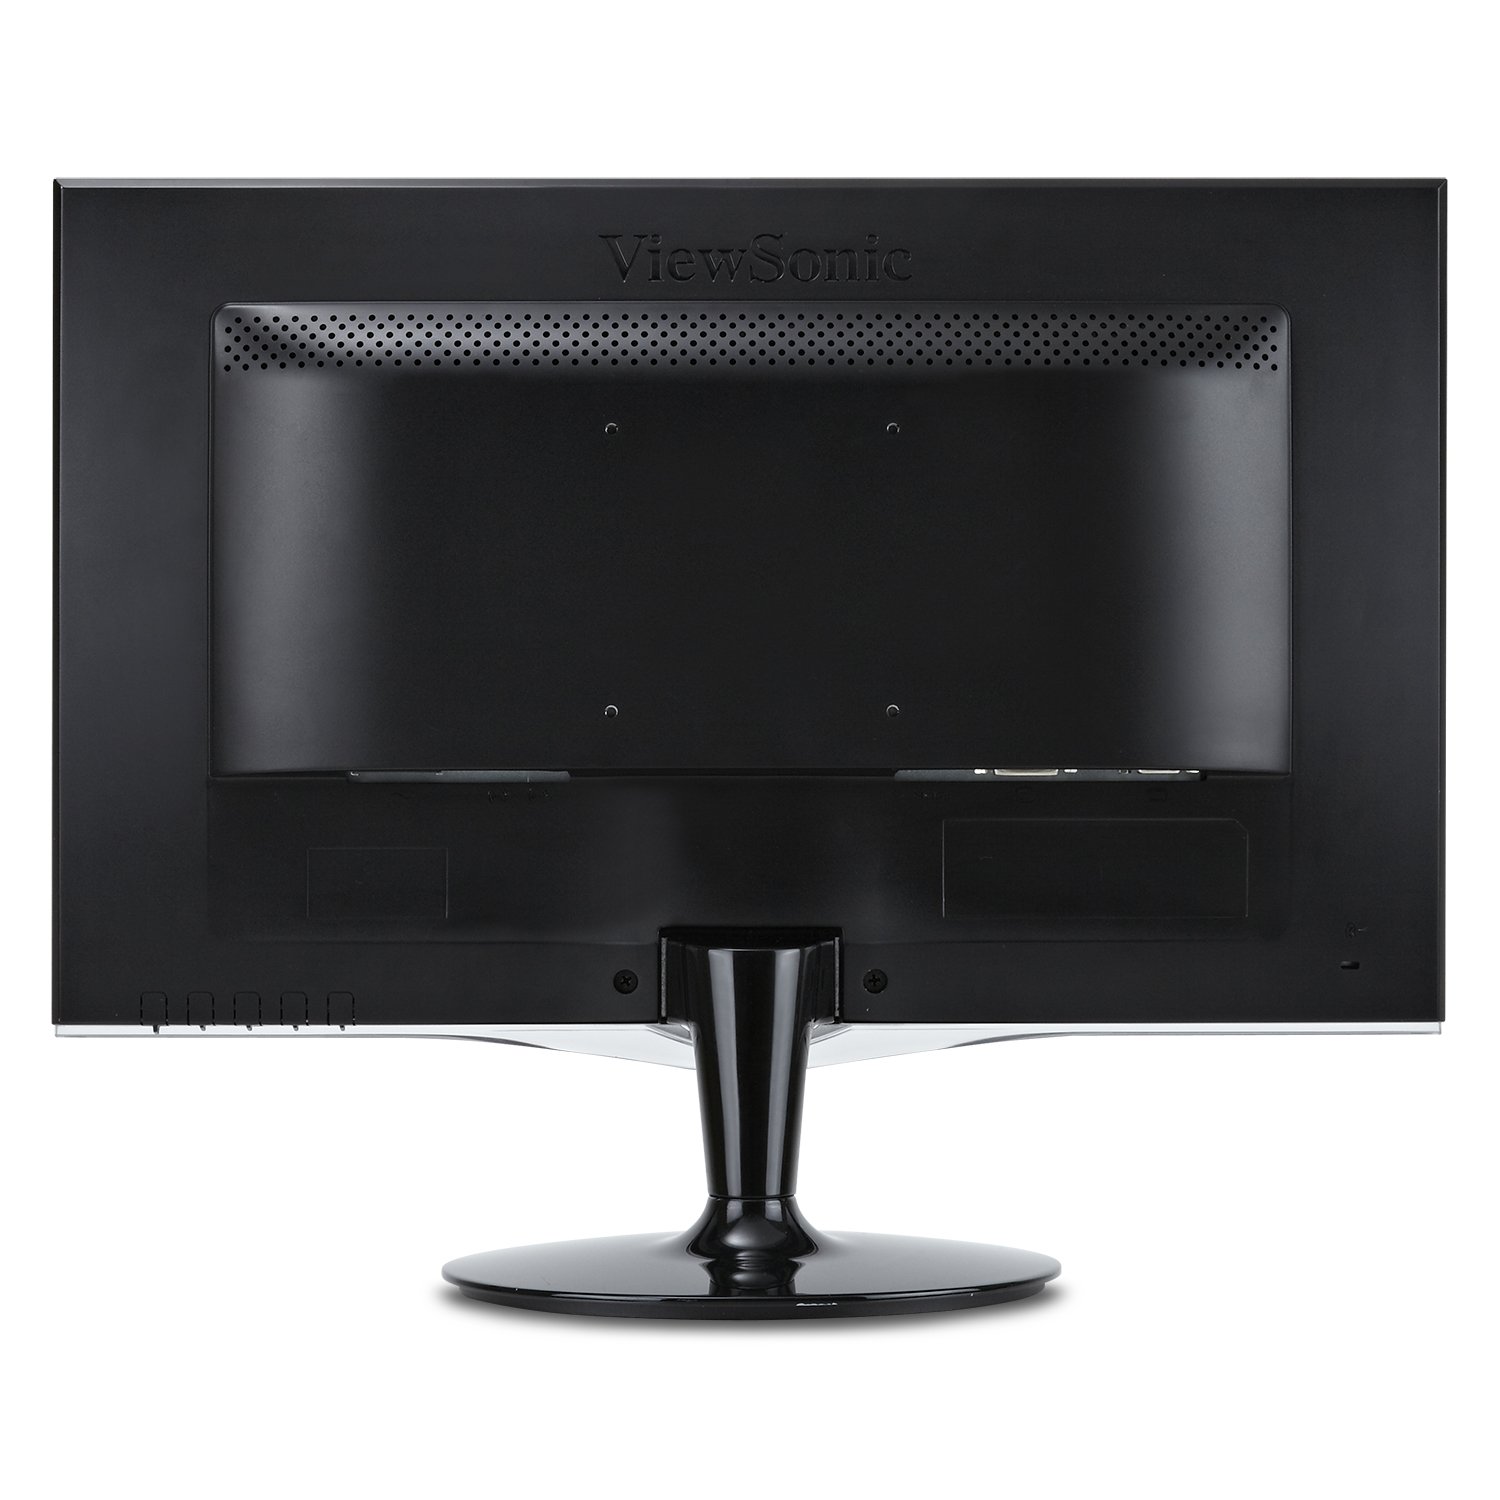 ViewSonic VX2452MH 24 Inch 2ms 60Hz 1080p Gaming Monitor with HDMI DVI and VGA inputs,Black